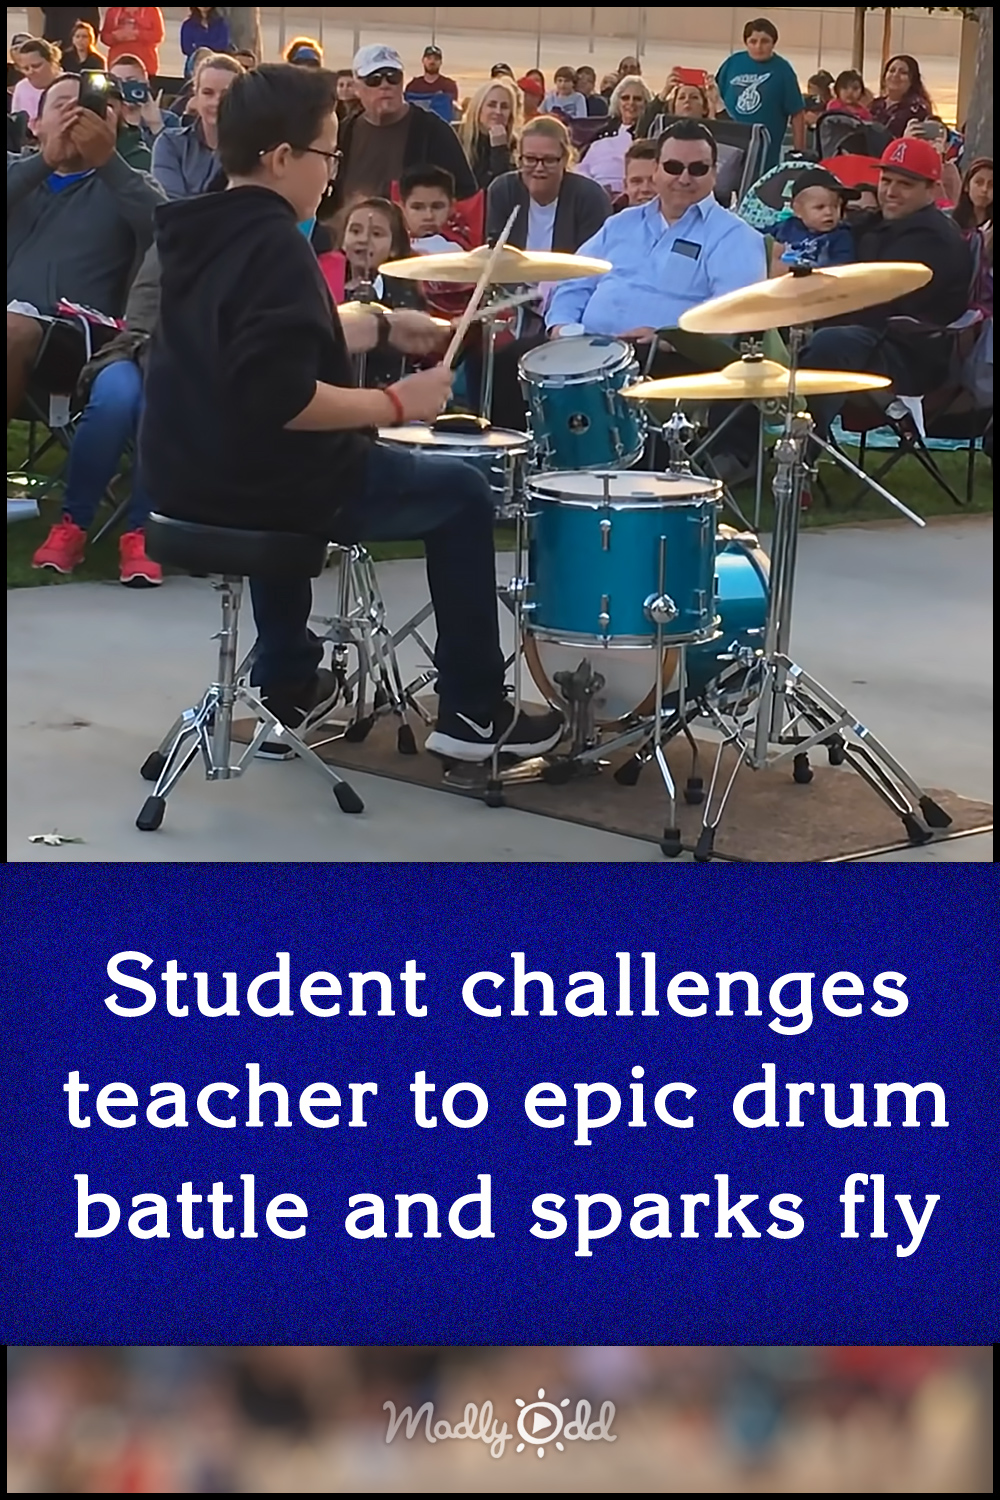 Student challenges teacher to epic drum battle and sparks fly